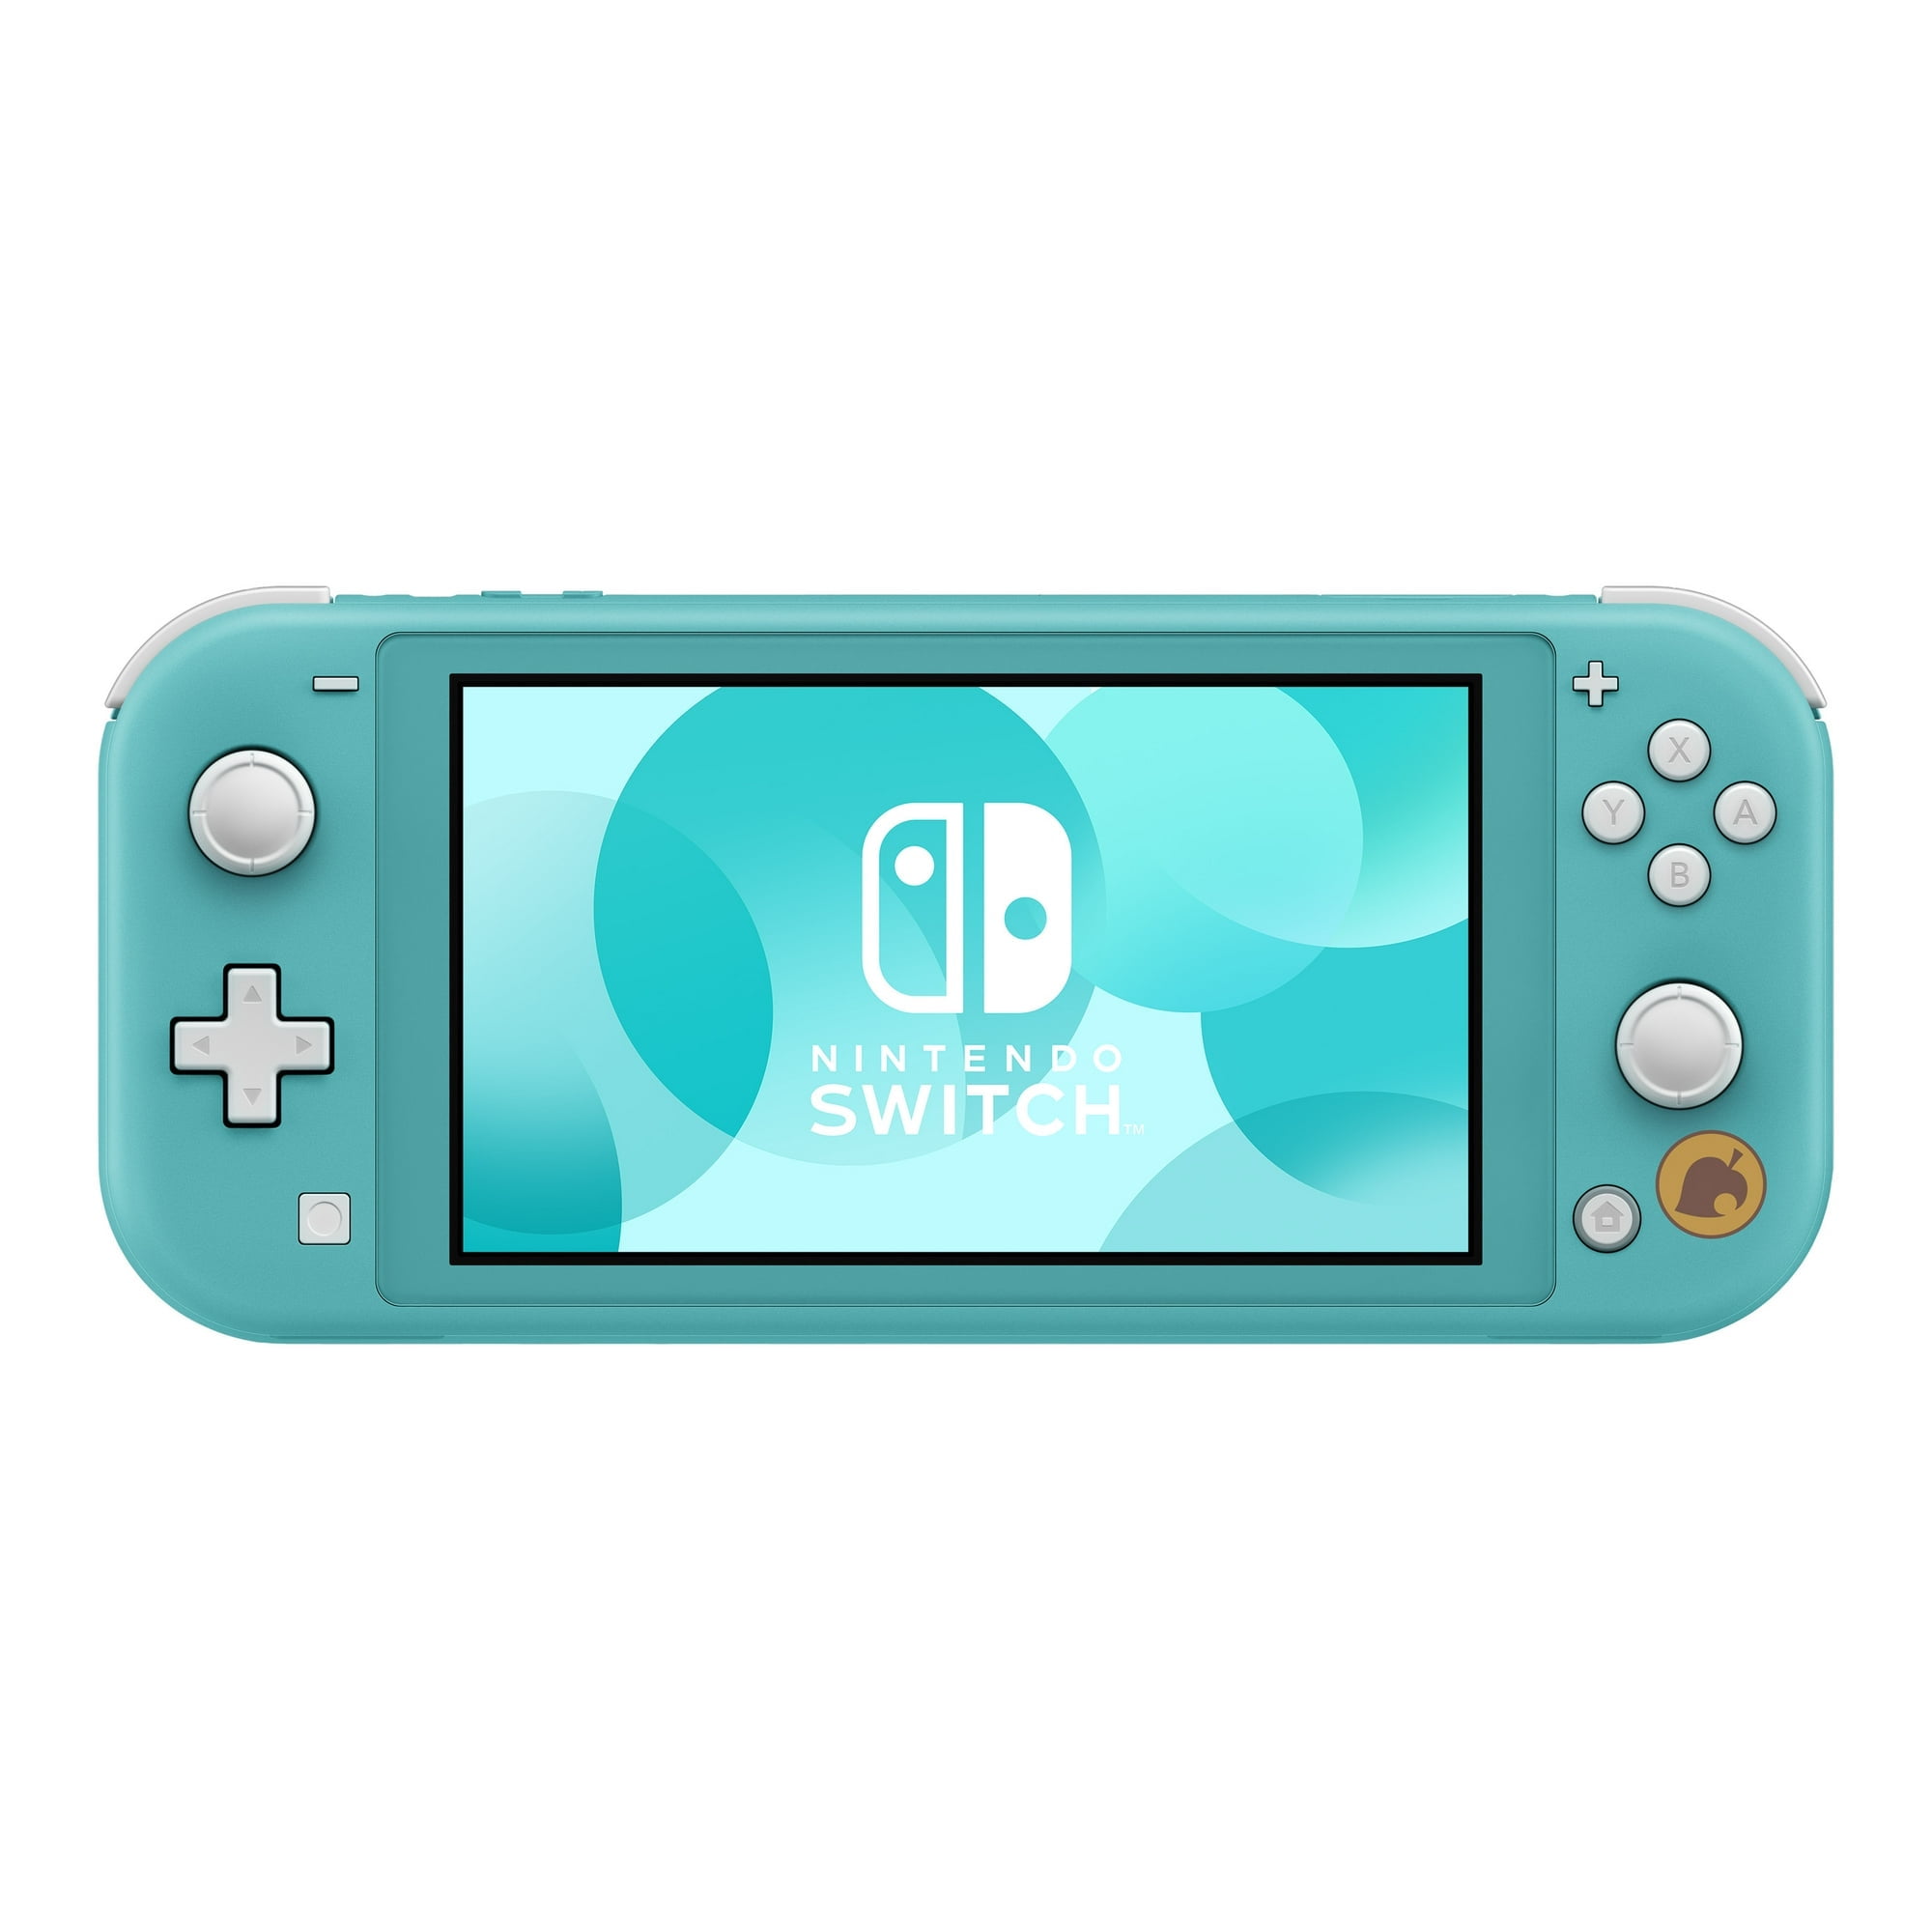 Nintendo Switch Lite (Coral) Bundle Includes Animal Crossing: New Horizons